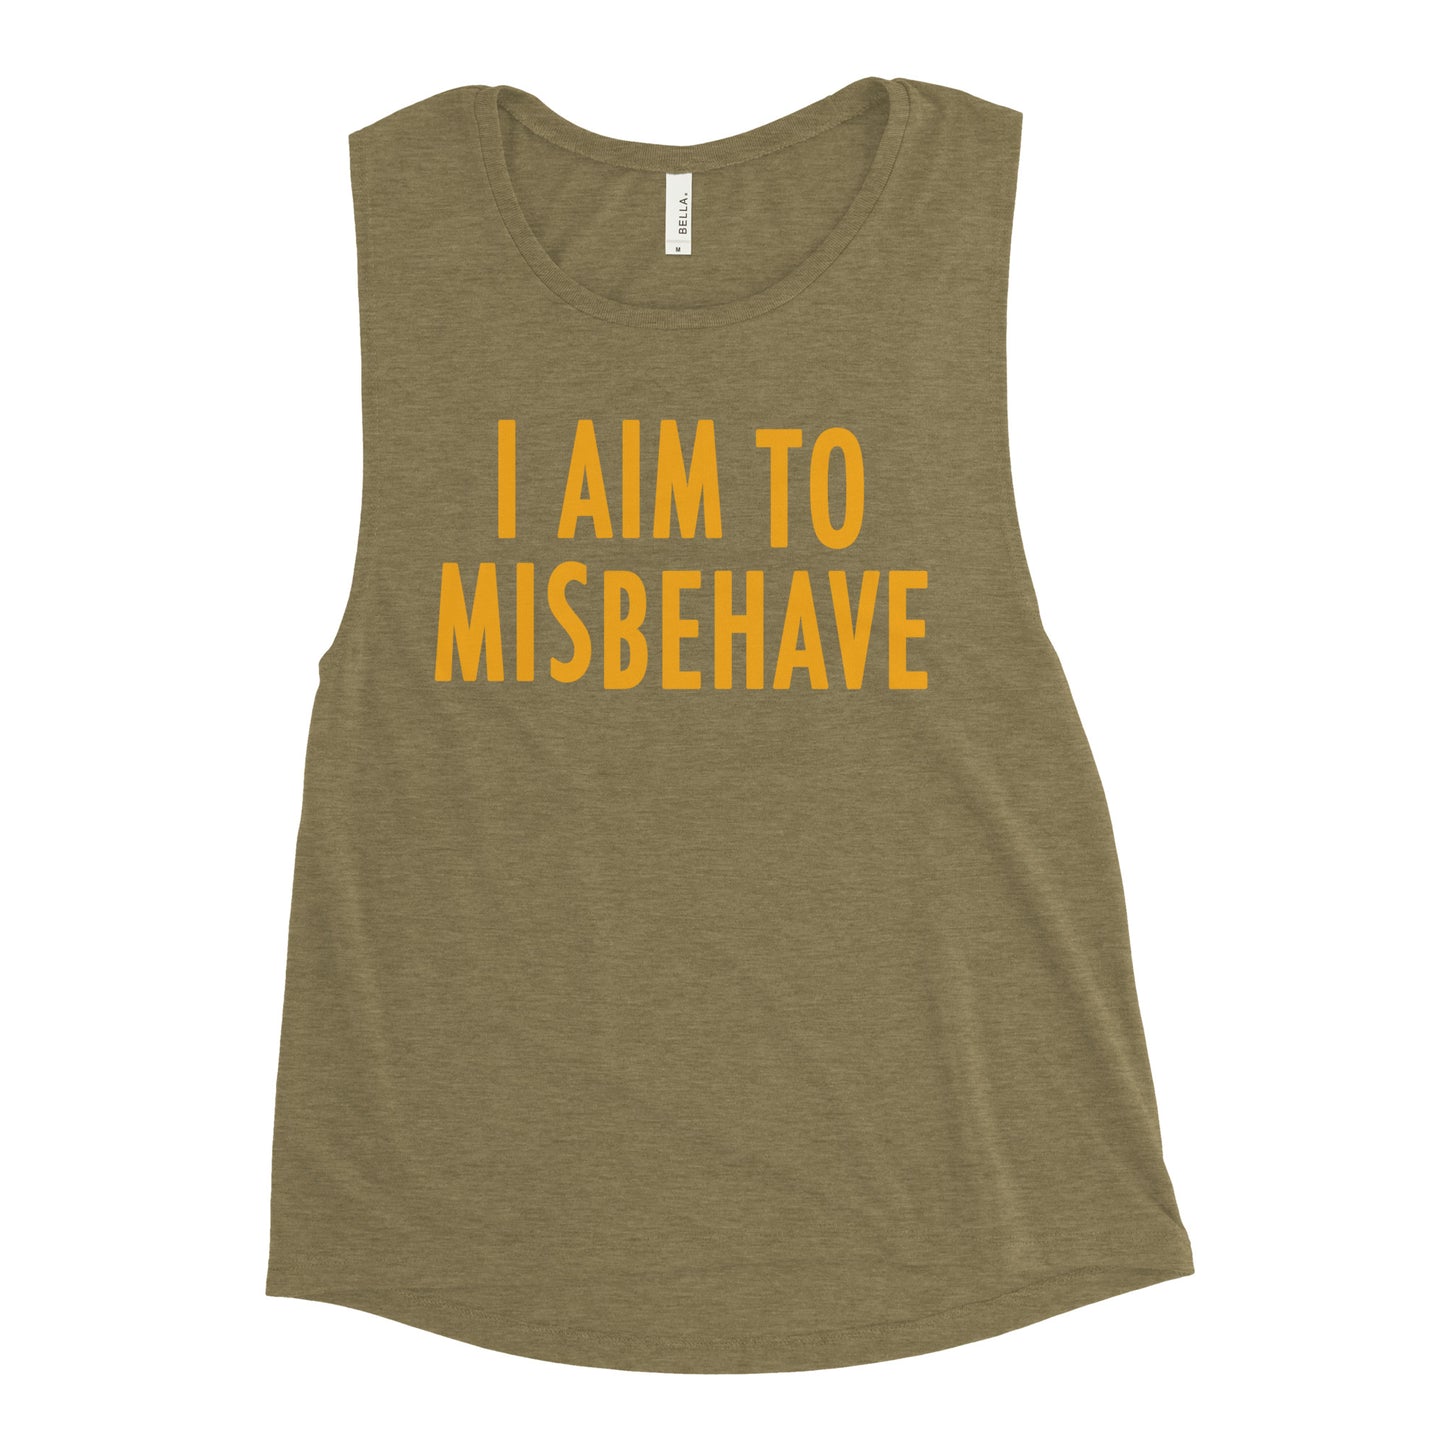 I Aim To Misbehave Women's Muscle Tank